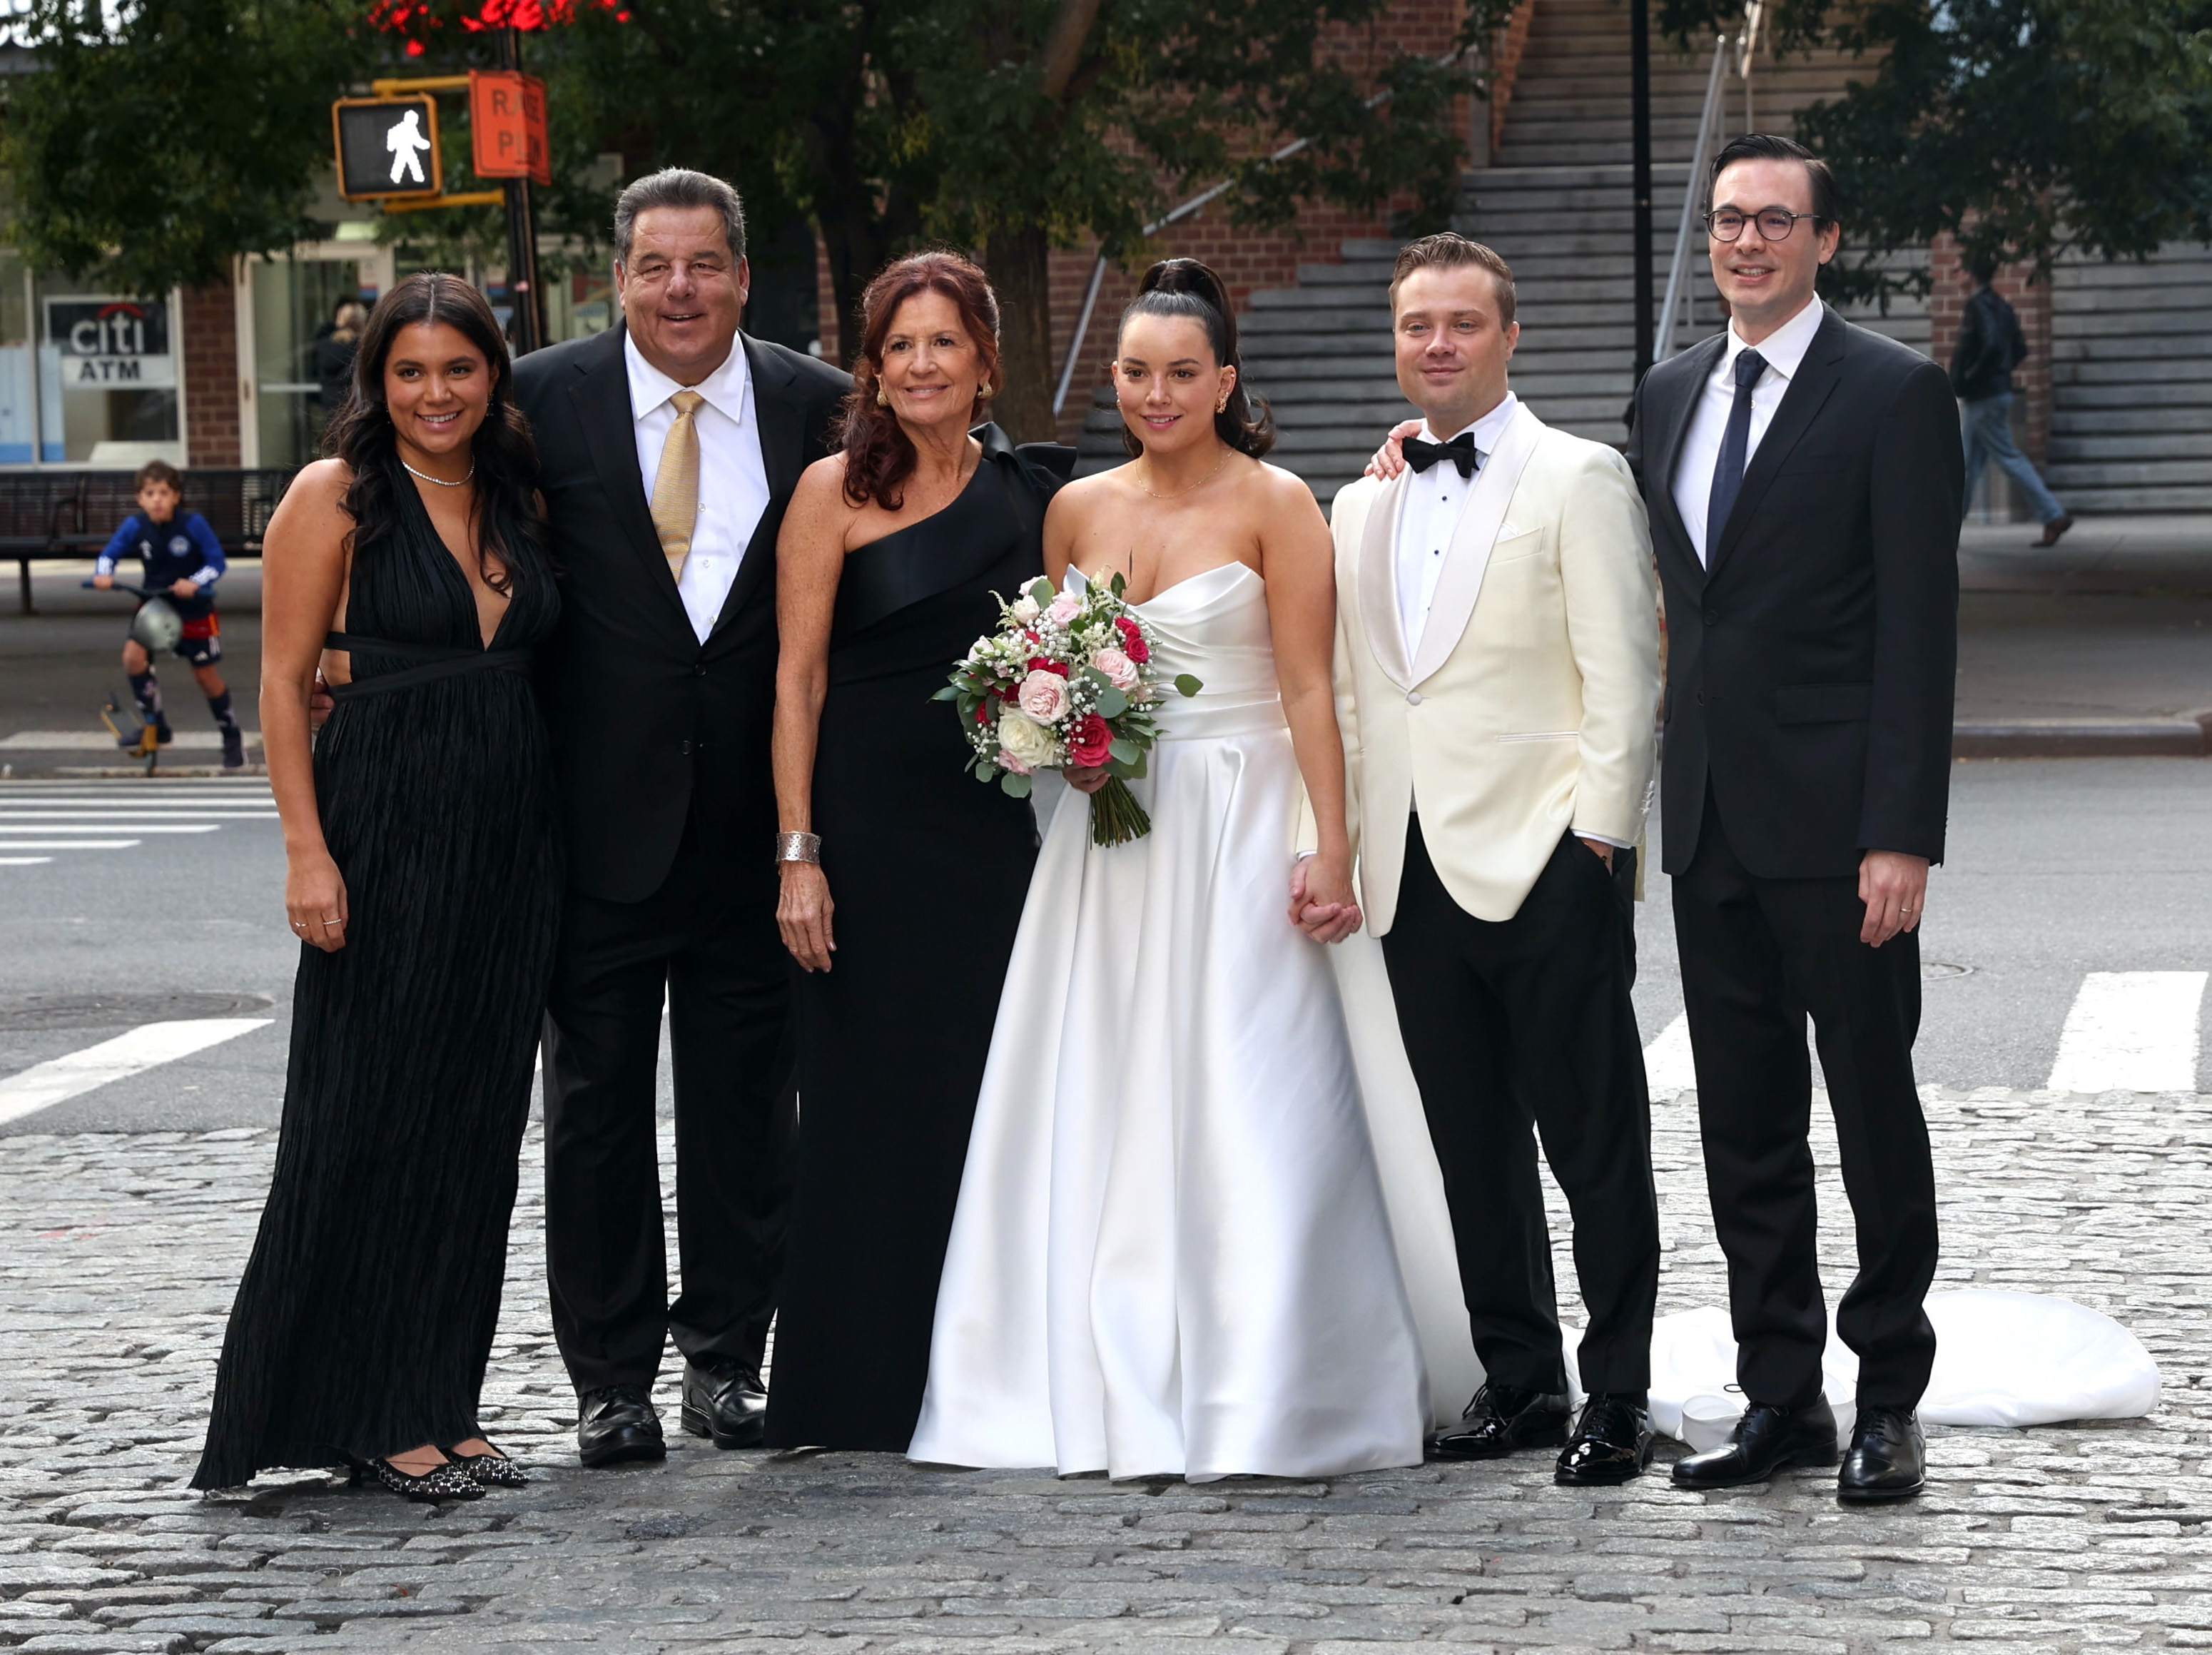 Bria, Steve, Laura, and Ciara Schirripa with Zach Binder and Michael Buccarelli on Ciara and Zach's wedding day in New York City on October 8, 2023 | Source: Getty Images